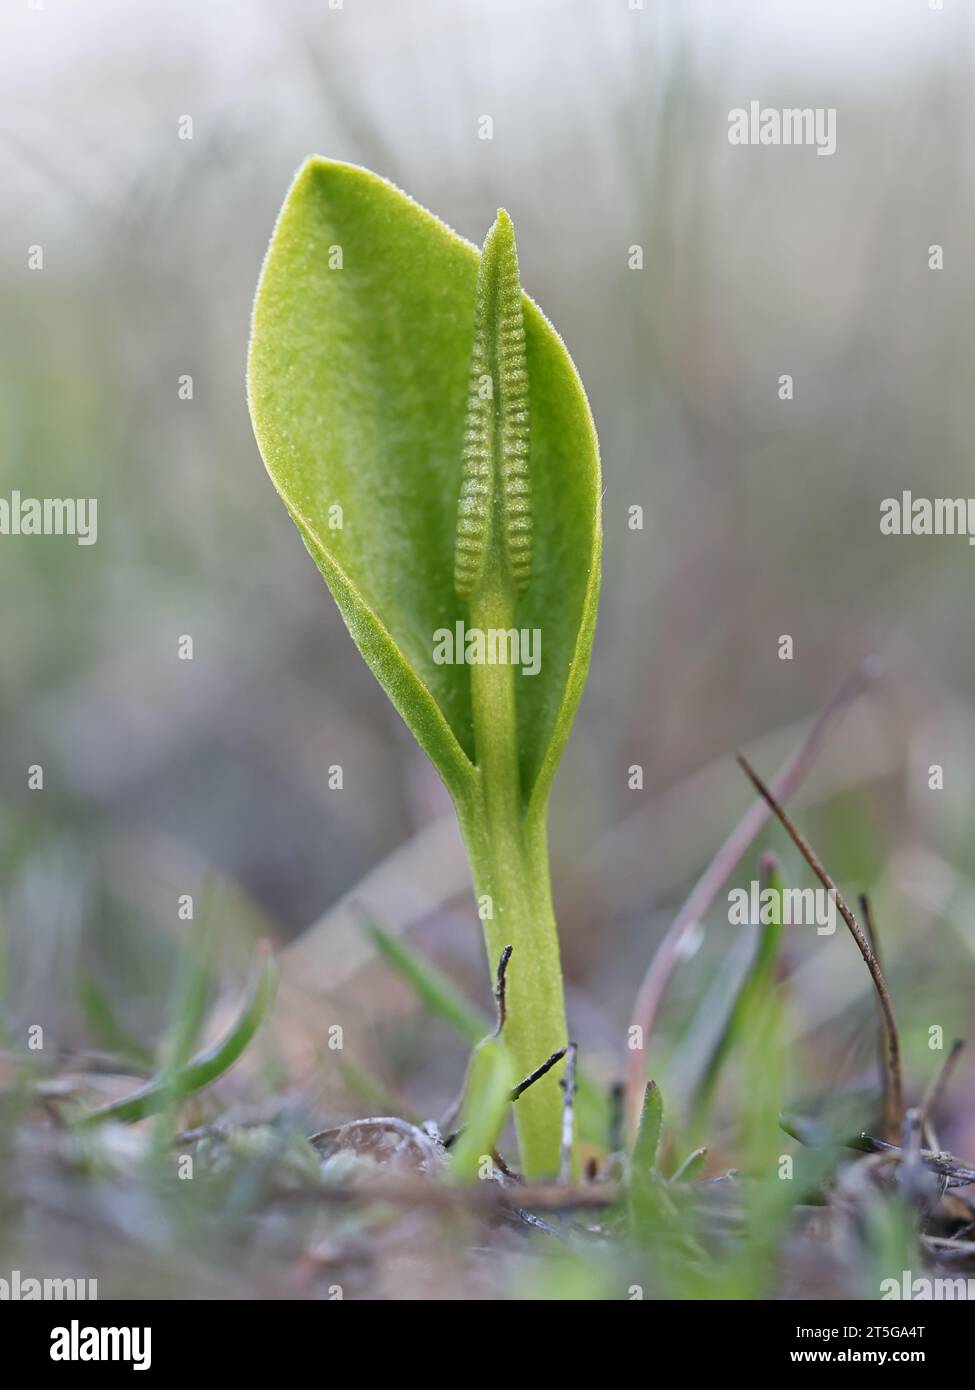 Ophioglossum vulgatum, commonly known as adder's-tongue, southern adders-tongue or adderstongue fern, wild plant from Finland Stock Photo